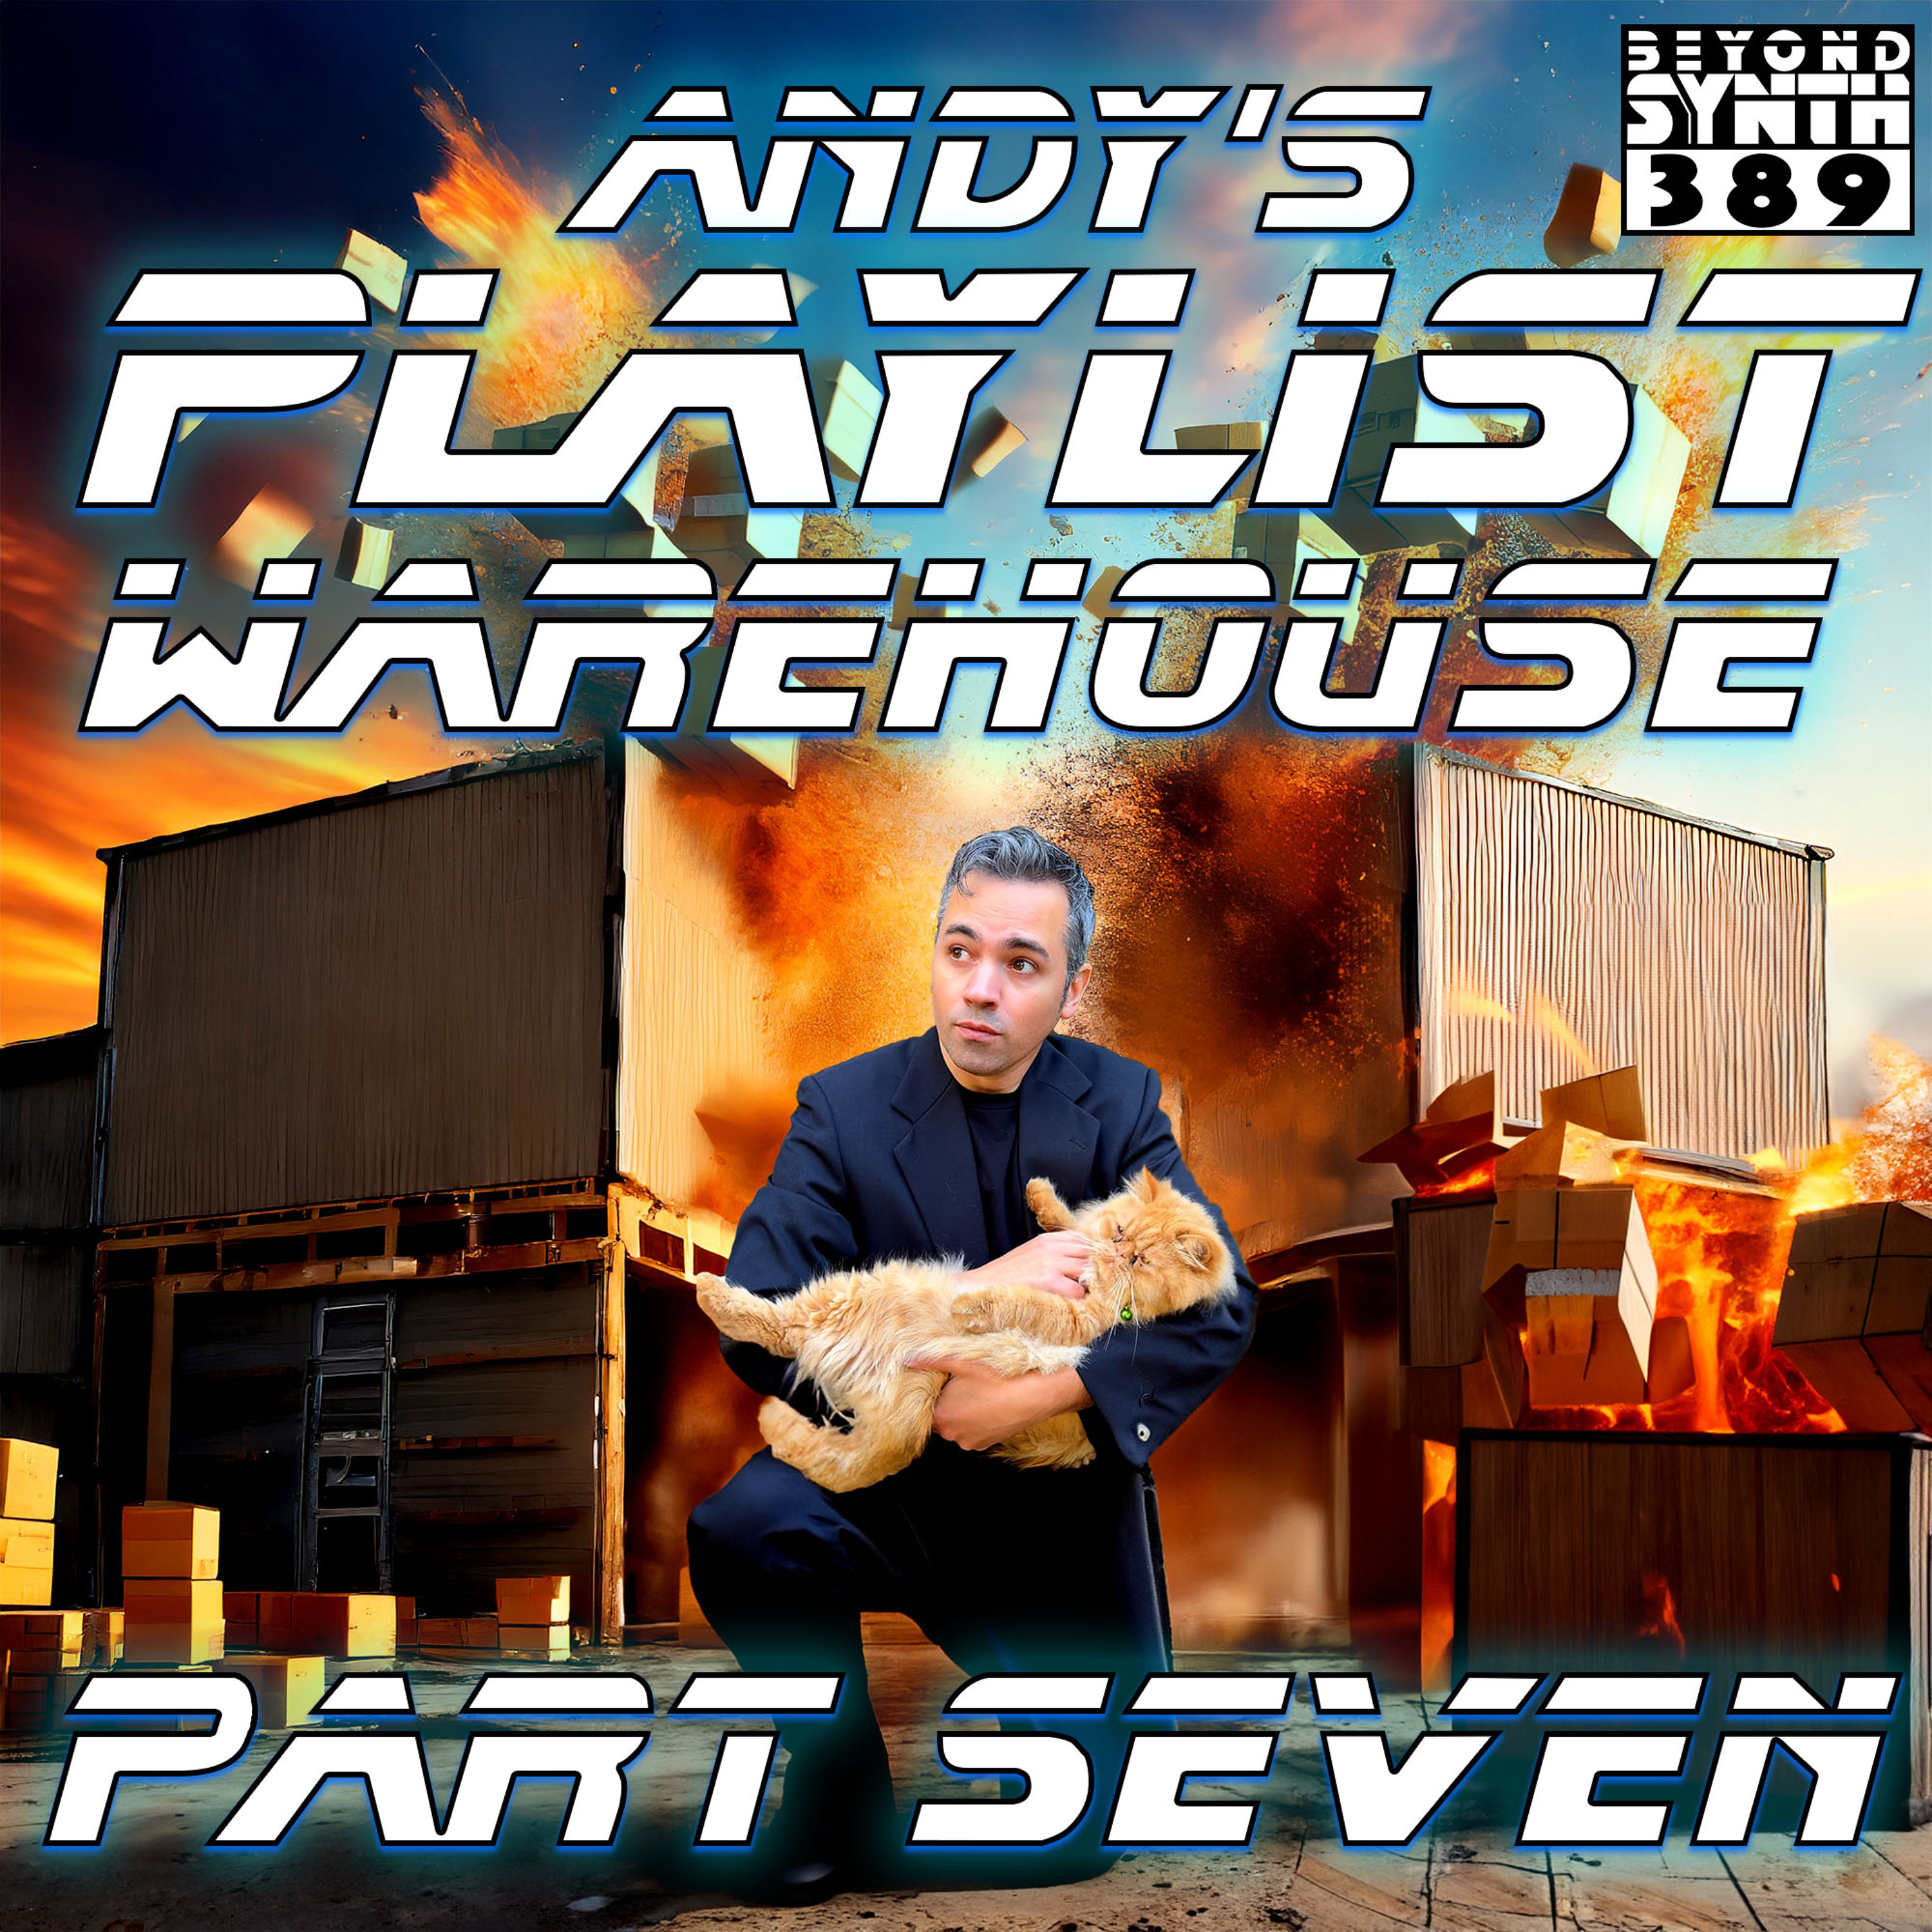 Beyond Synth - 389 - Andy’s Playlist Warehouse 07 with Kyle, Akio, and Rama